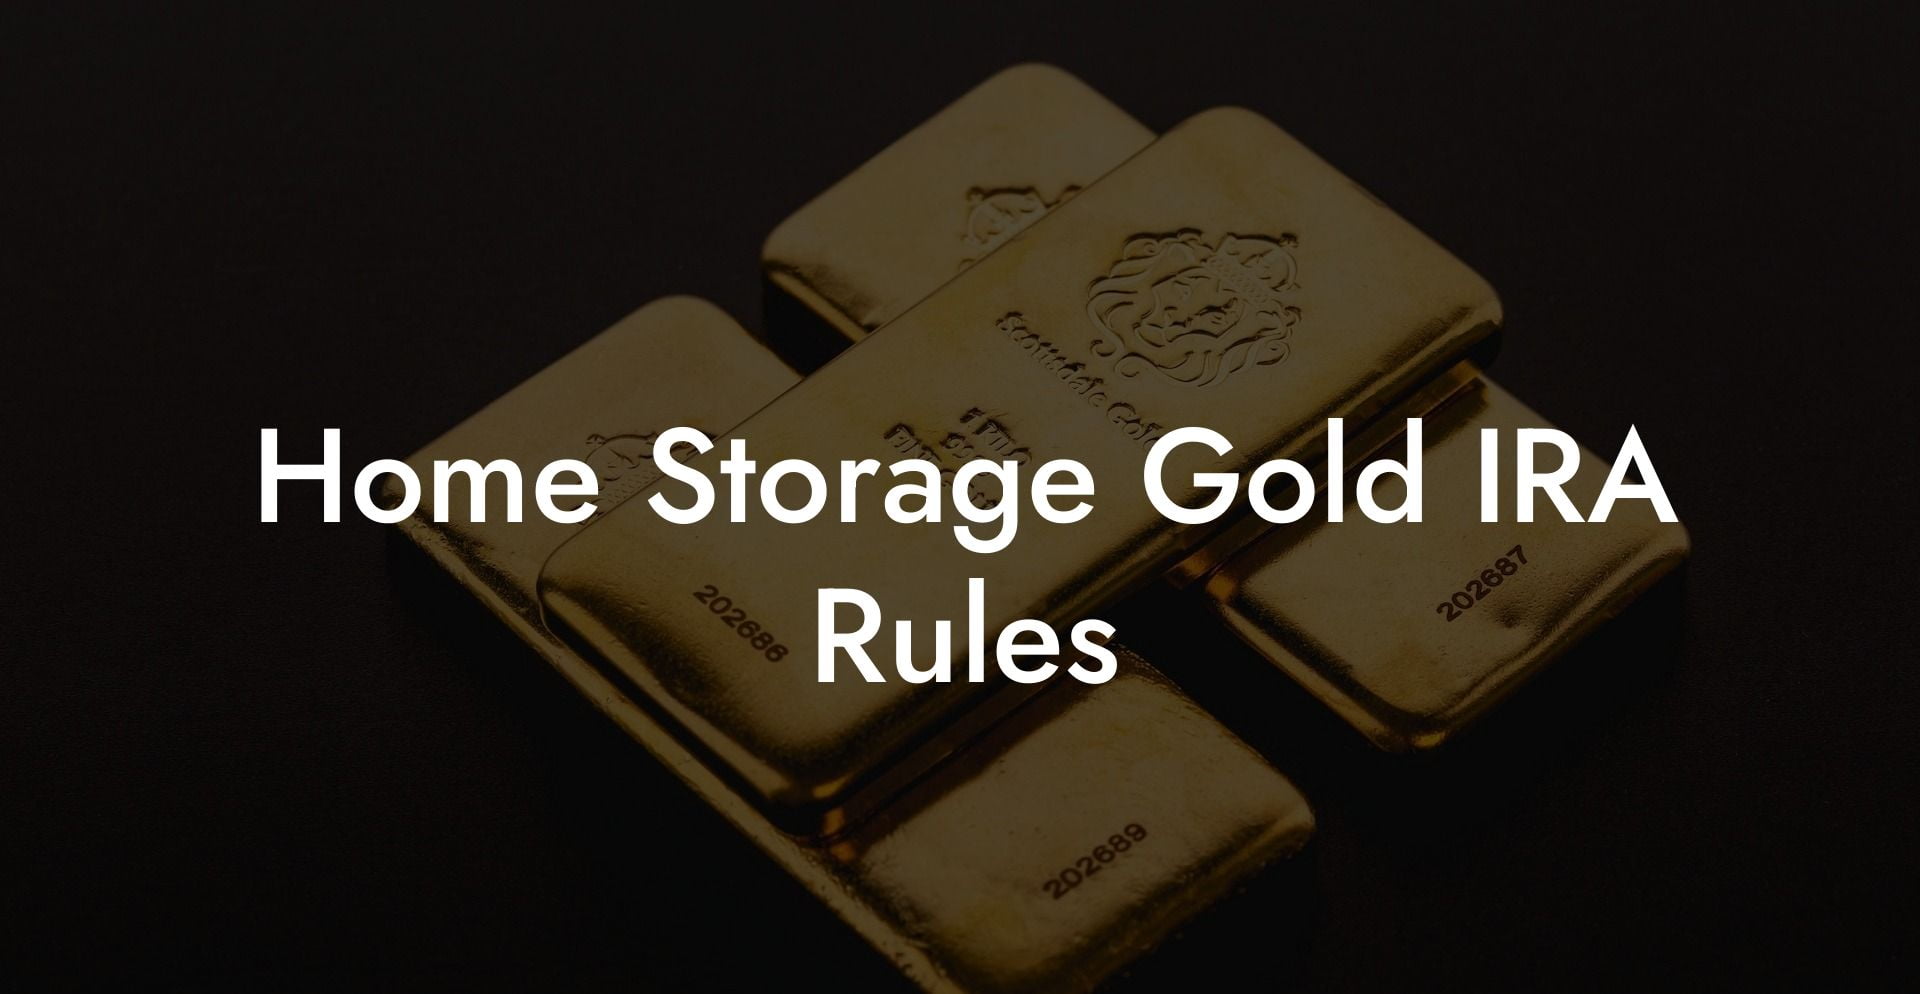 Home Storage Gold IRA Rules